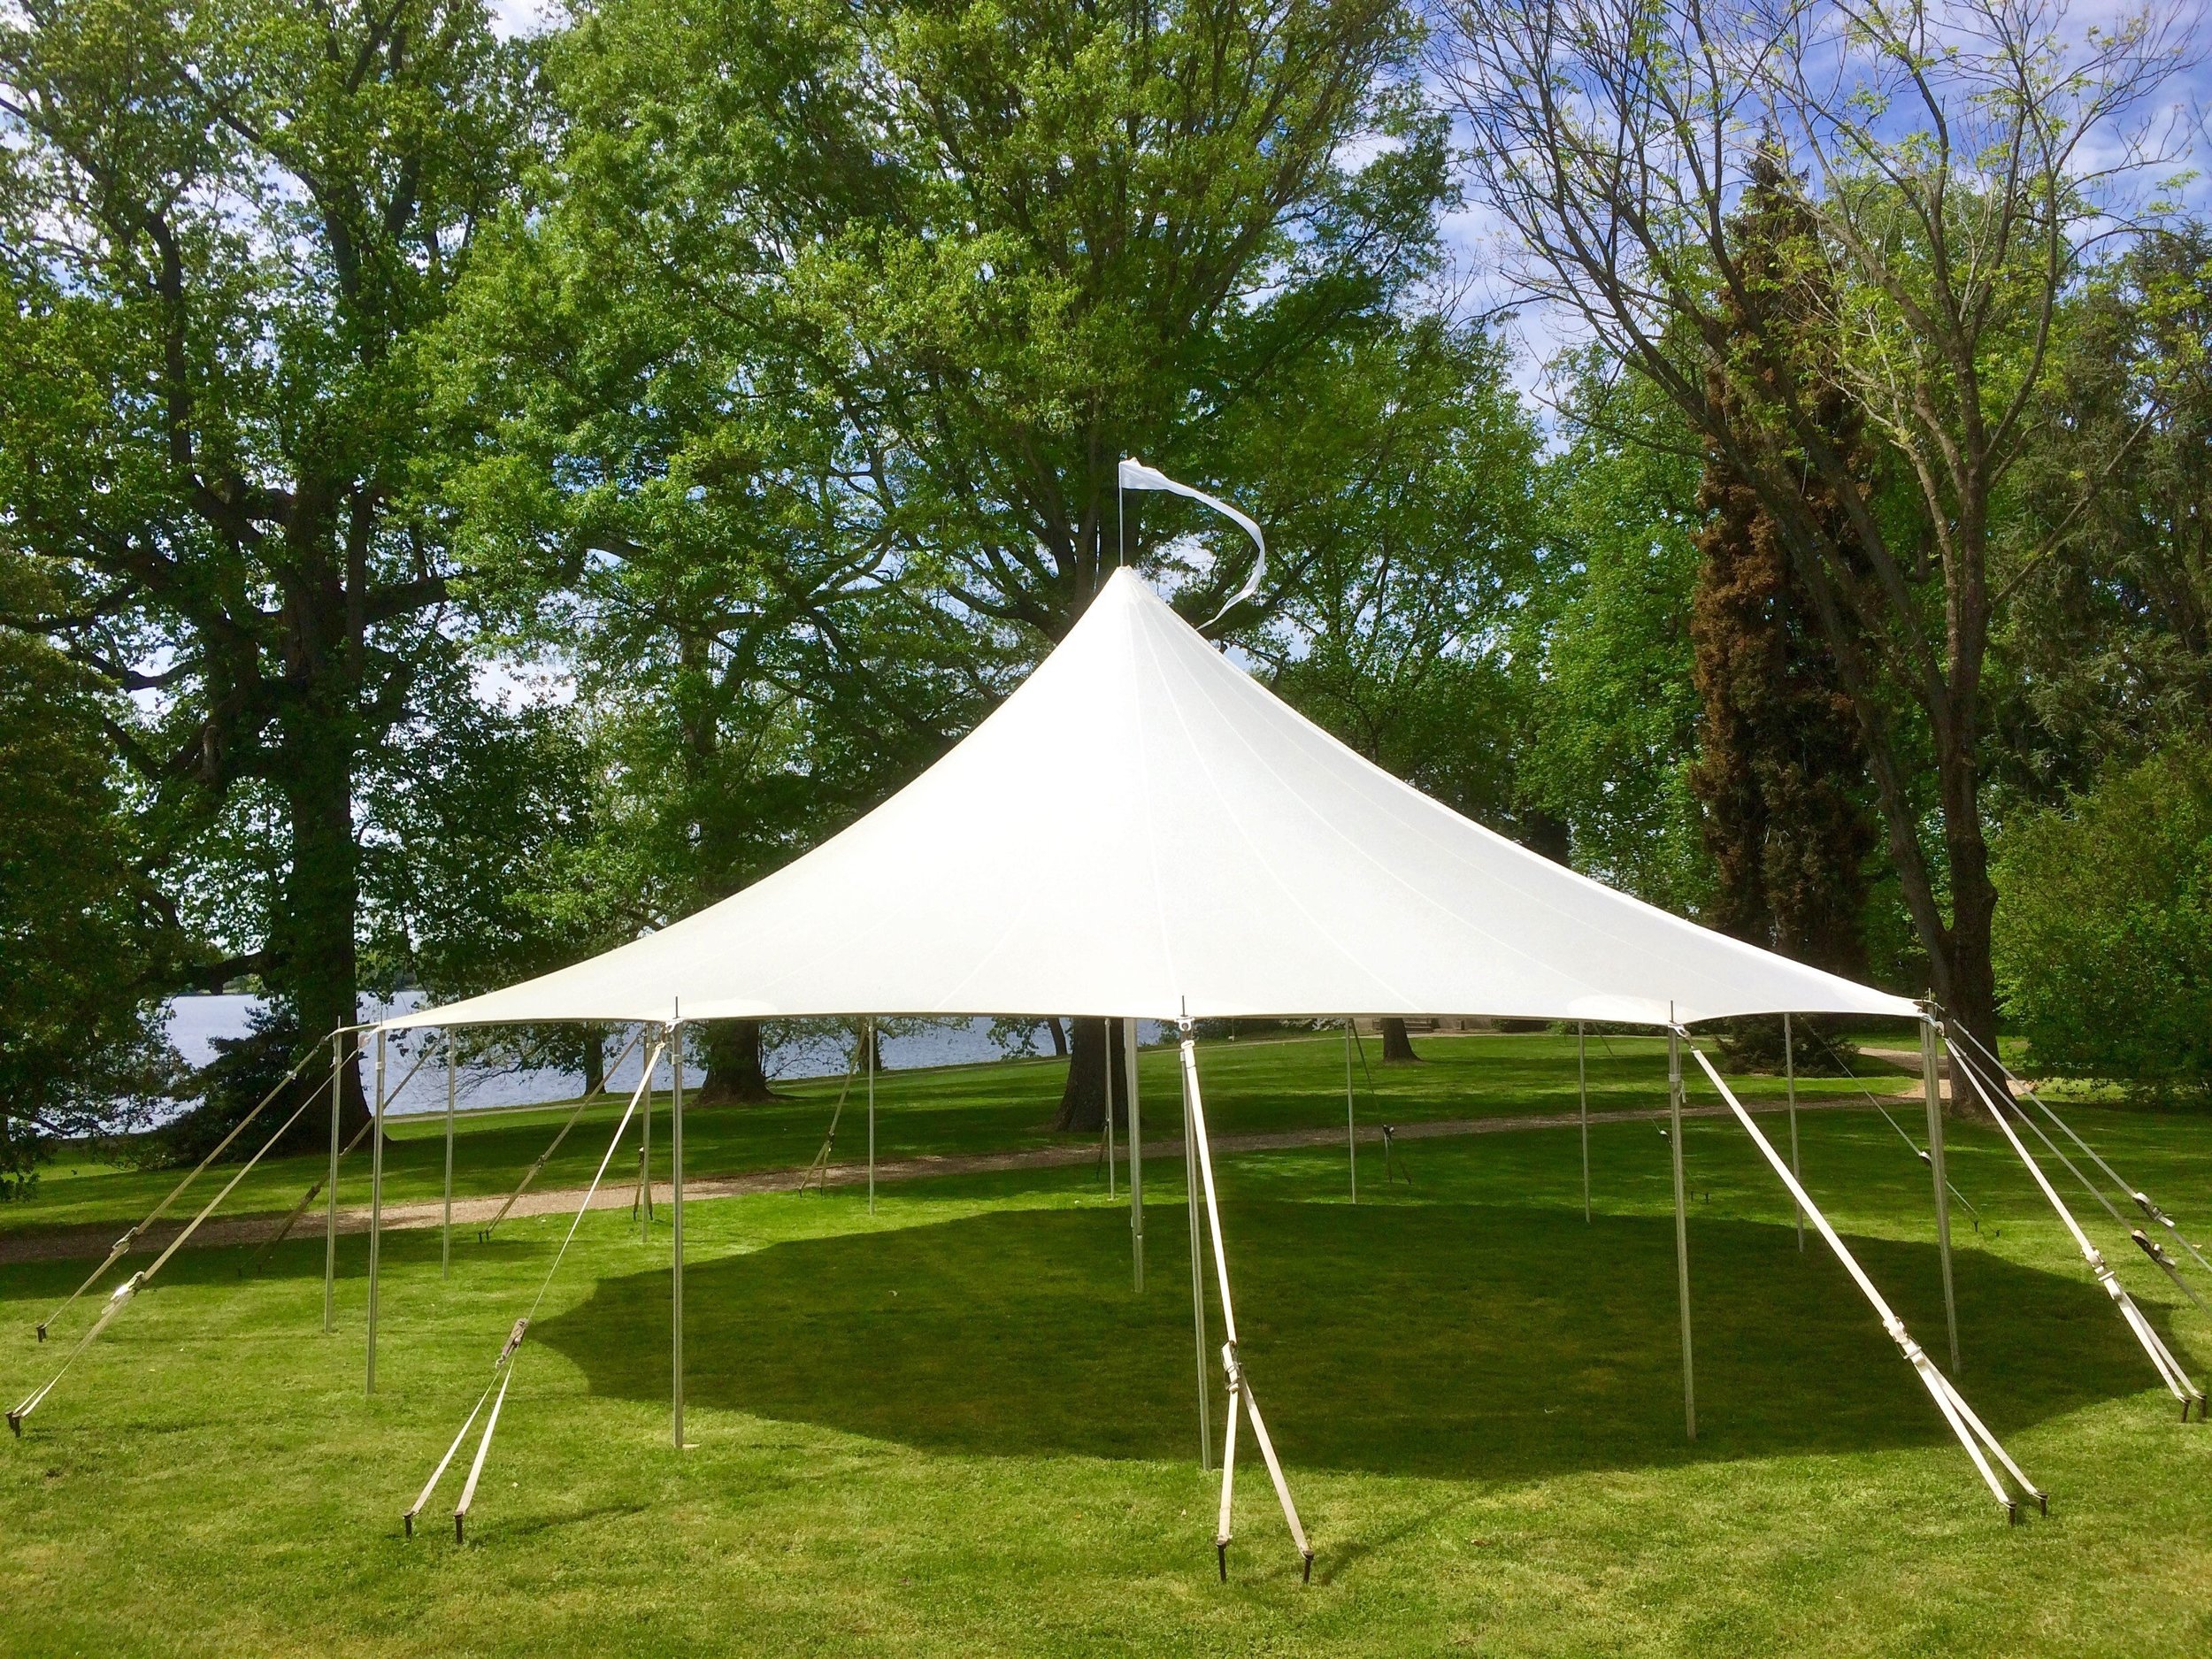 Beautiful Sailcloth tent for rent in Lansdale, PA